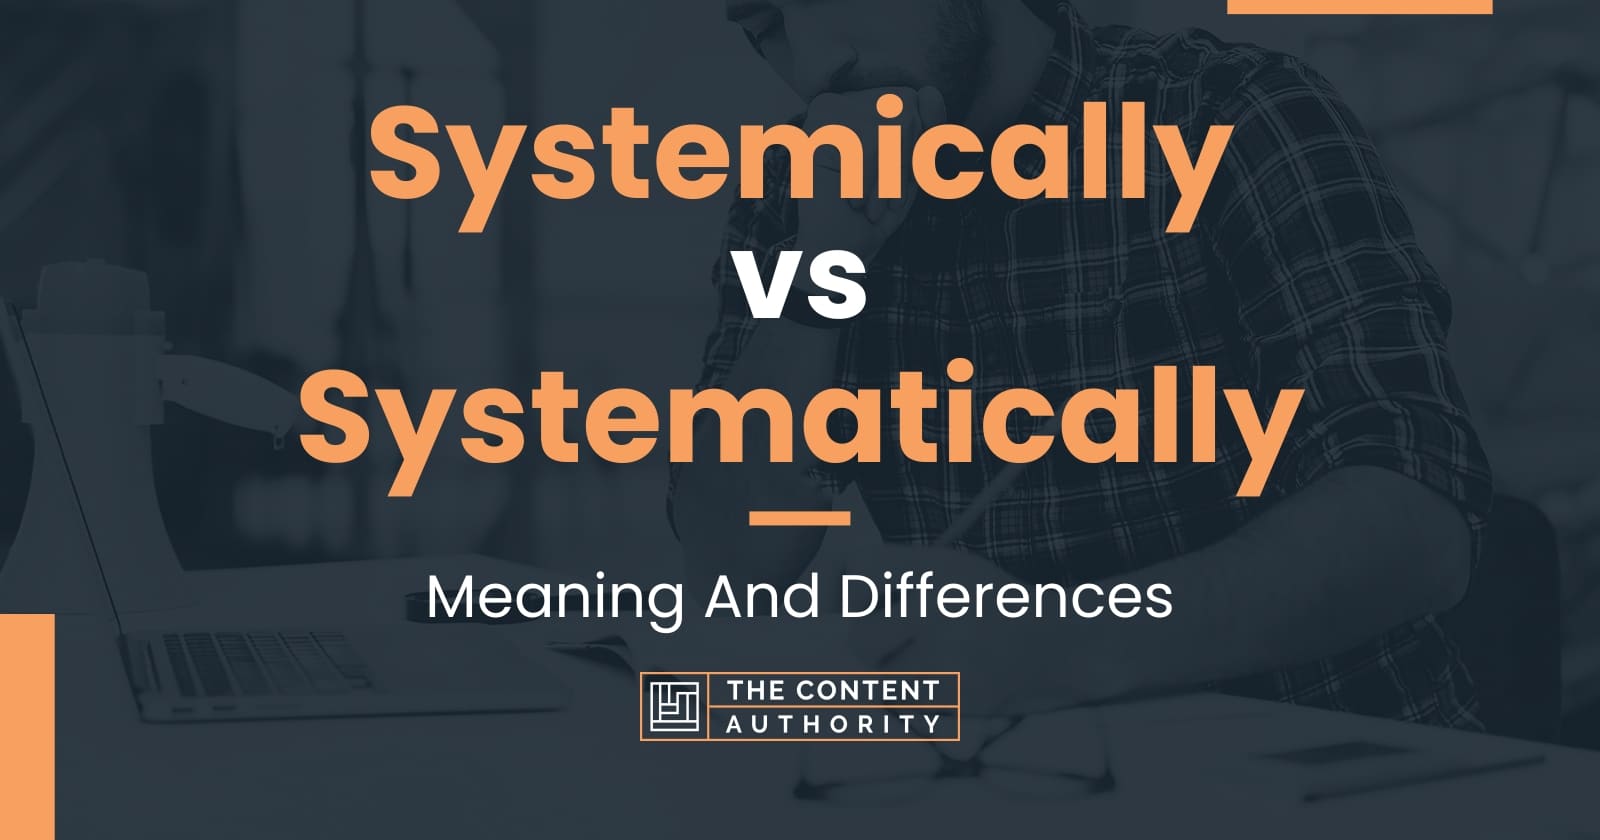 Systemically vs Systematically: Meaning And Differences